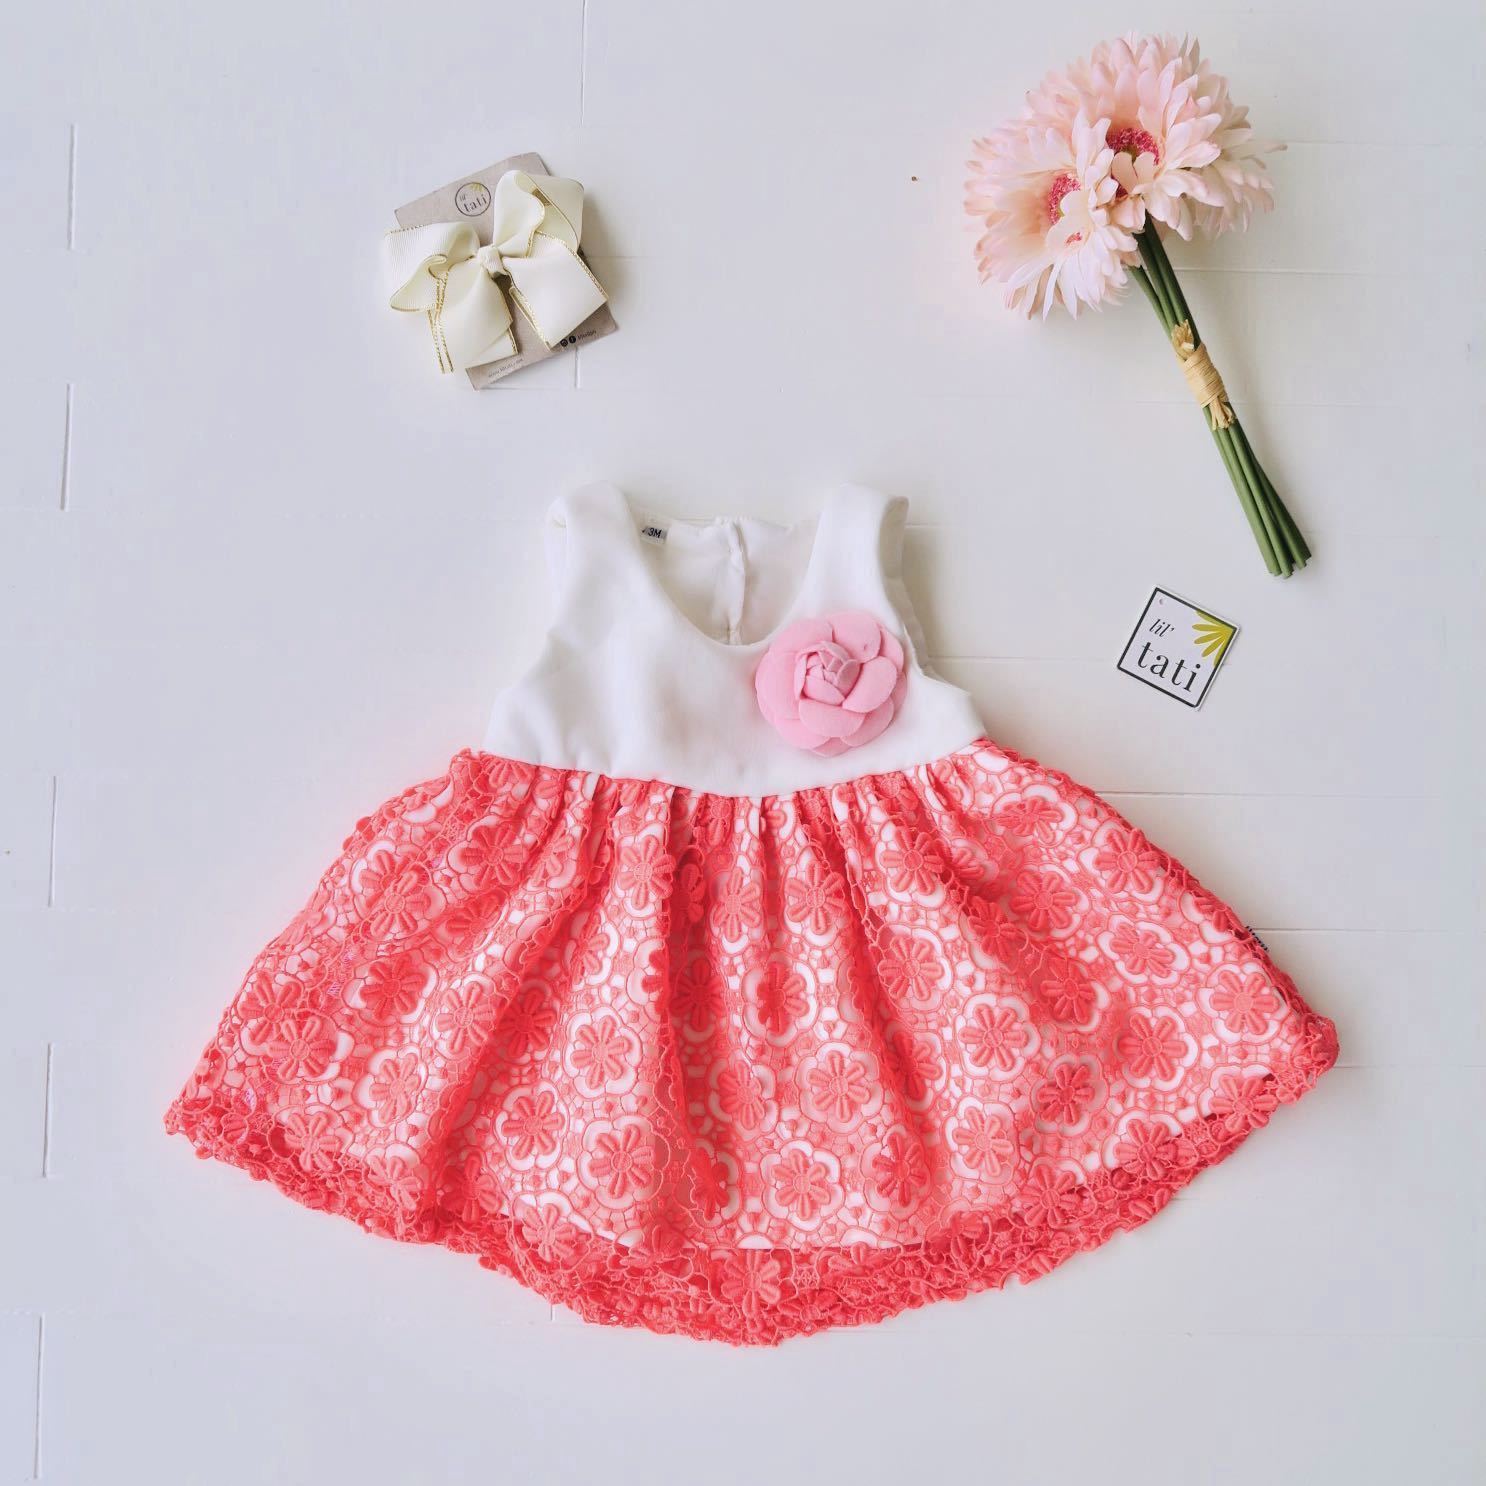 Iris Dress in White Neoprene and Coral Pink Lace - Lil' Tati